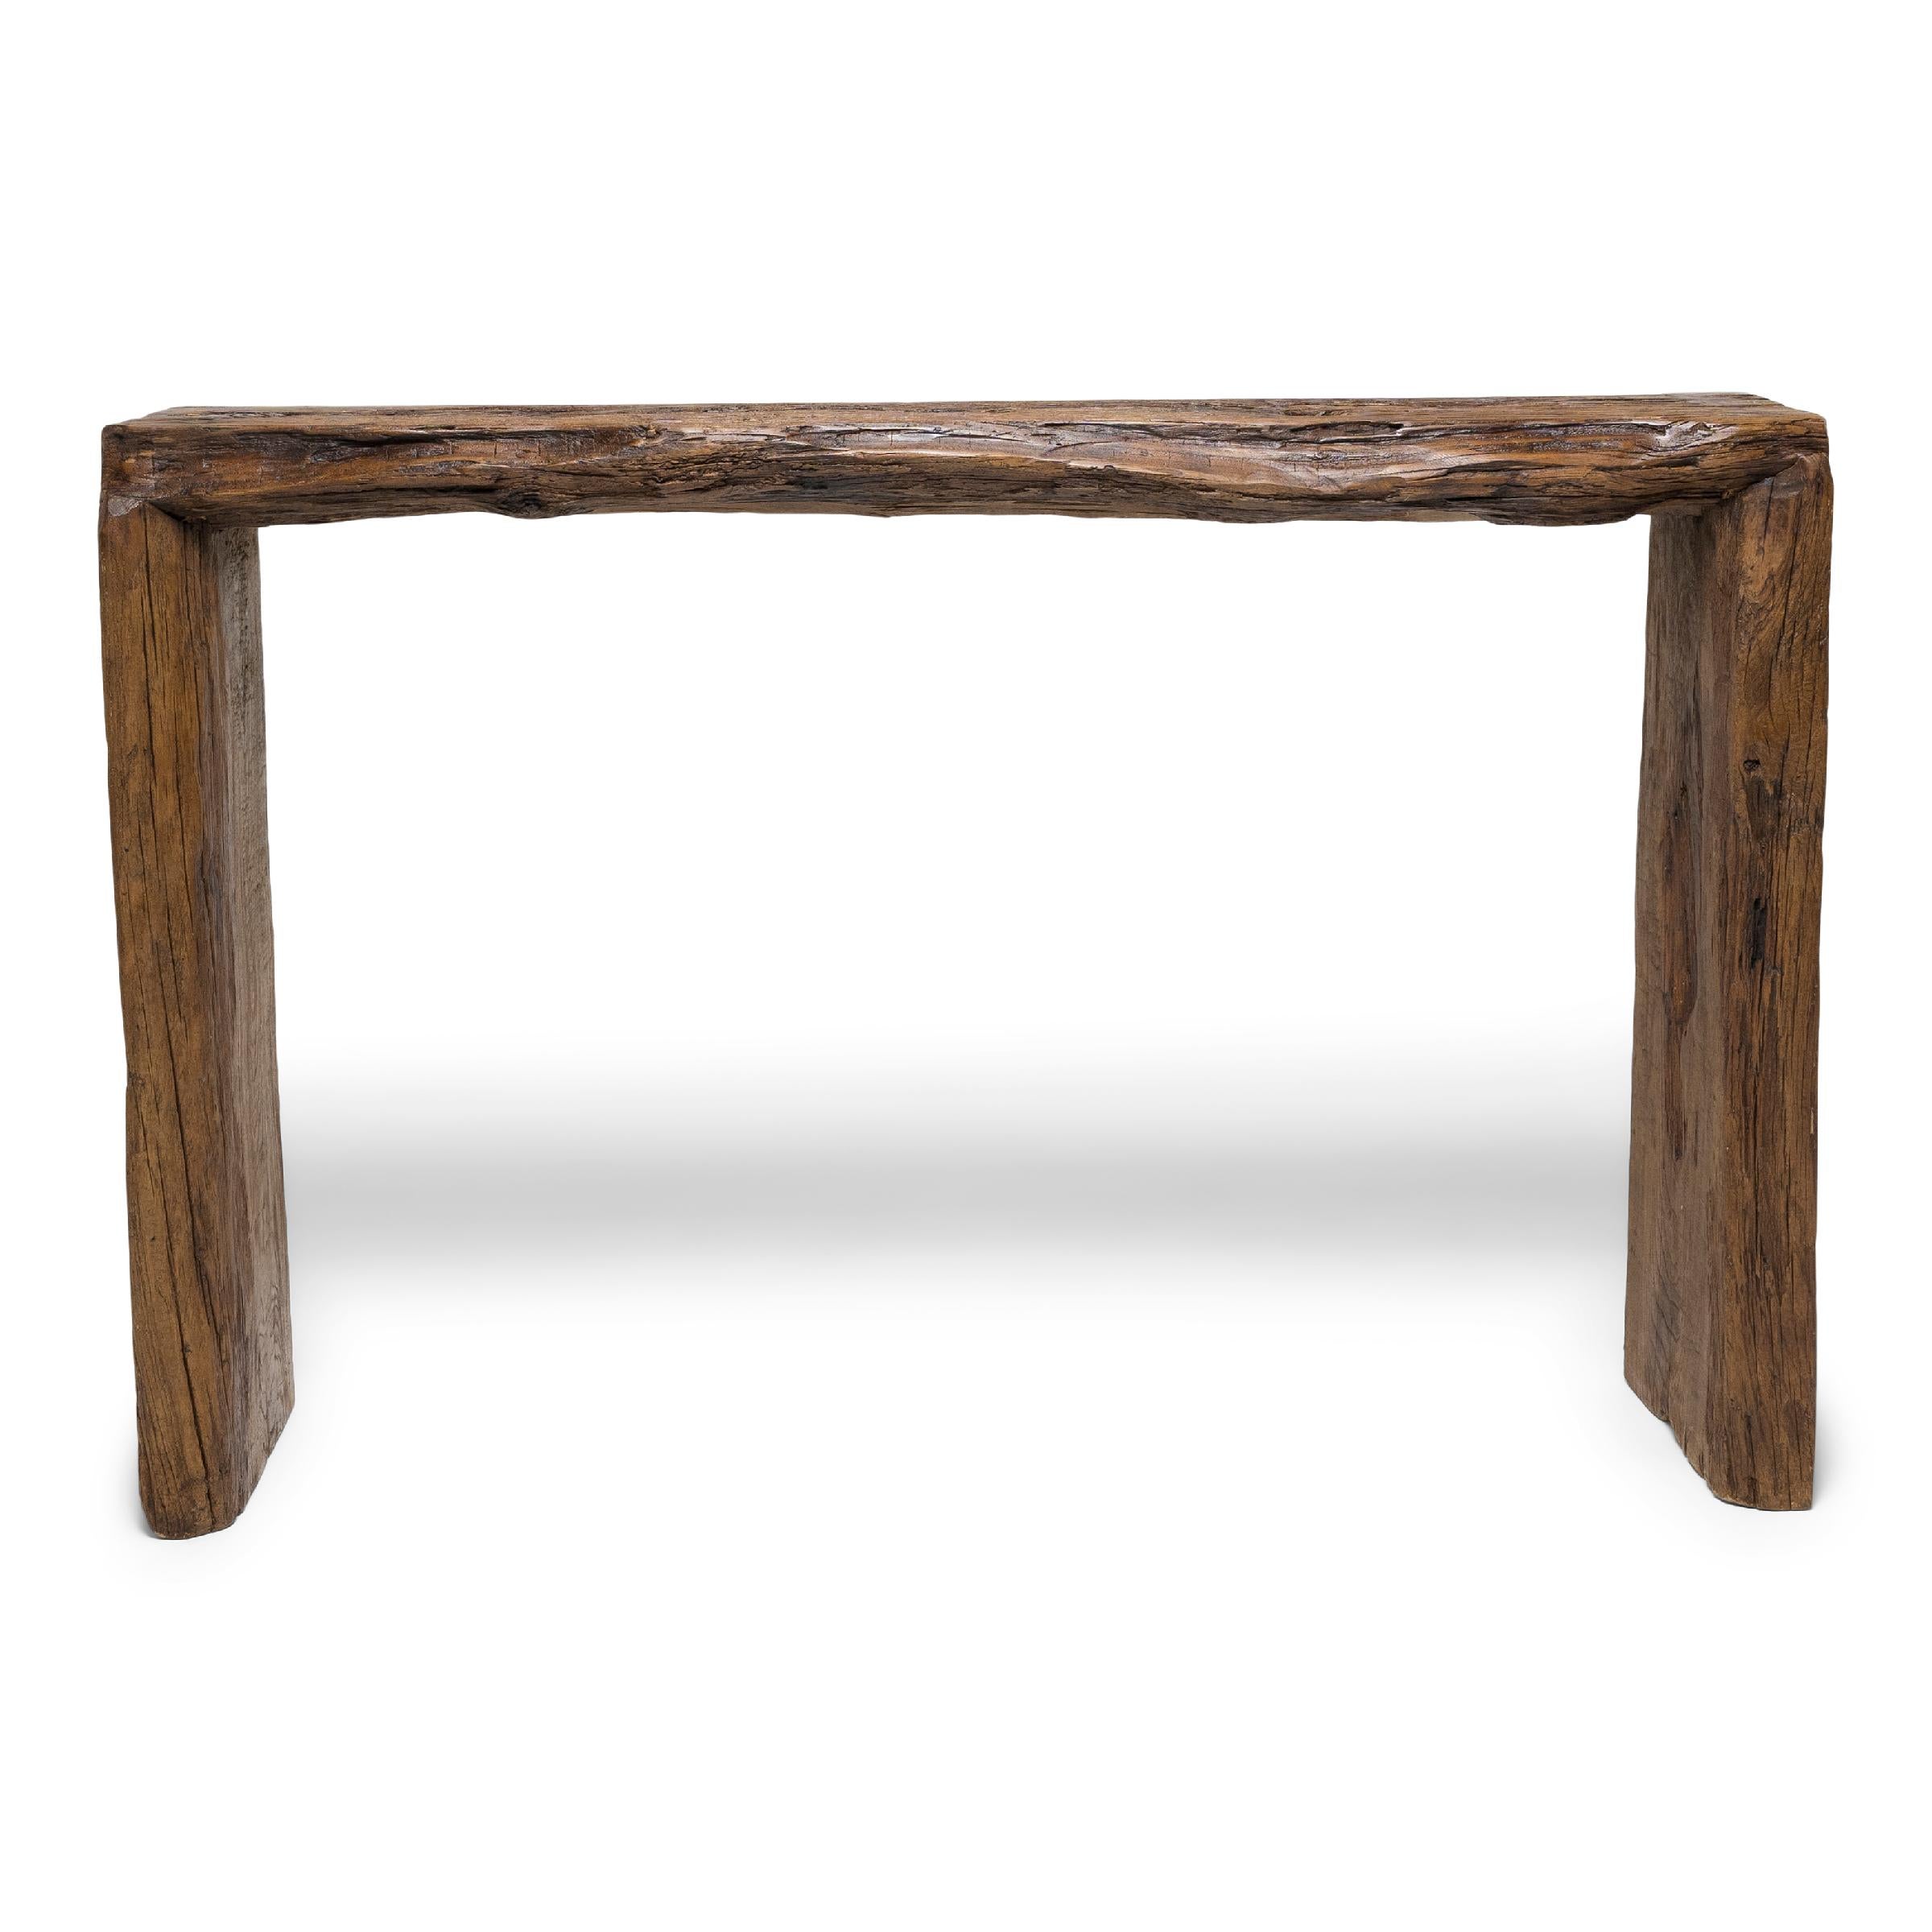 This contemporary console table is a celebration of wabi-sabi style. Crafted of wood reclaimed from Qing-dynasty architecture, the table has a minimalist waterfall design with dovetailed corners that recreate traditional joinery methods and add